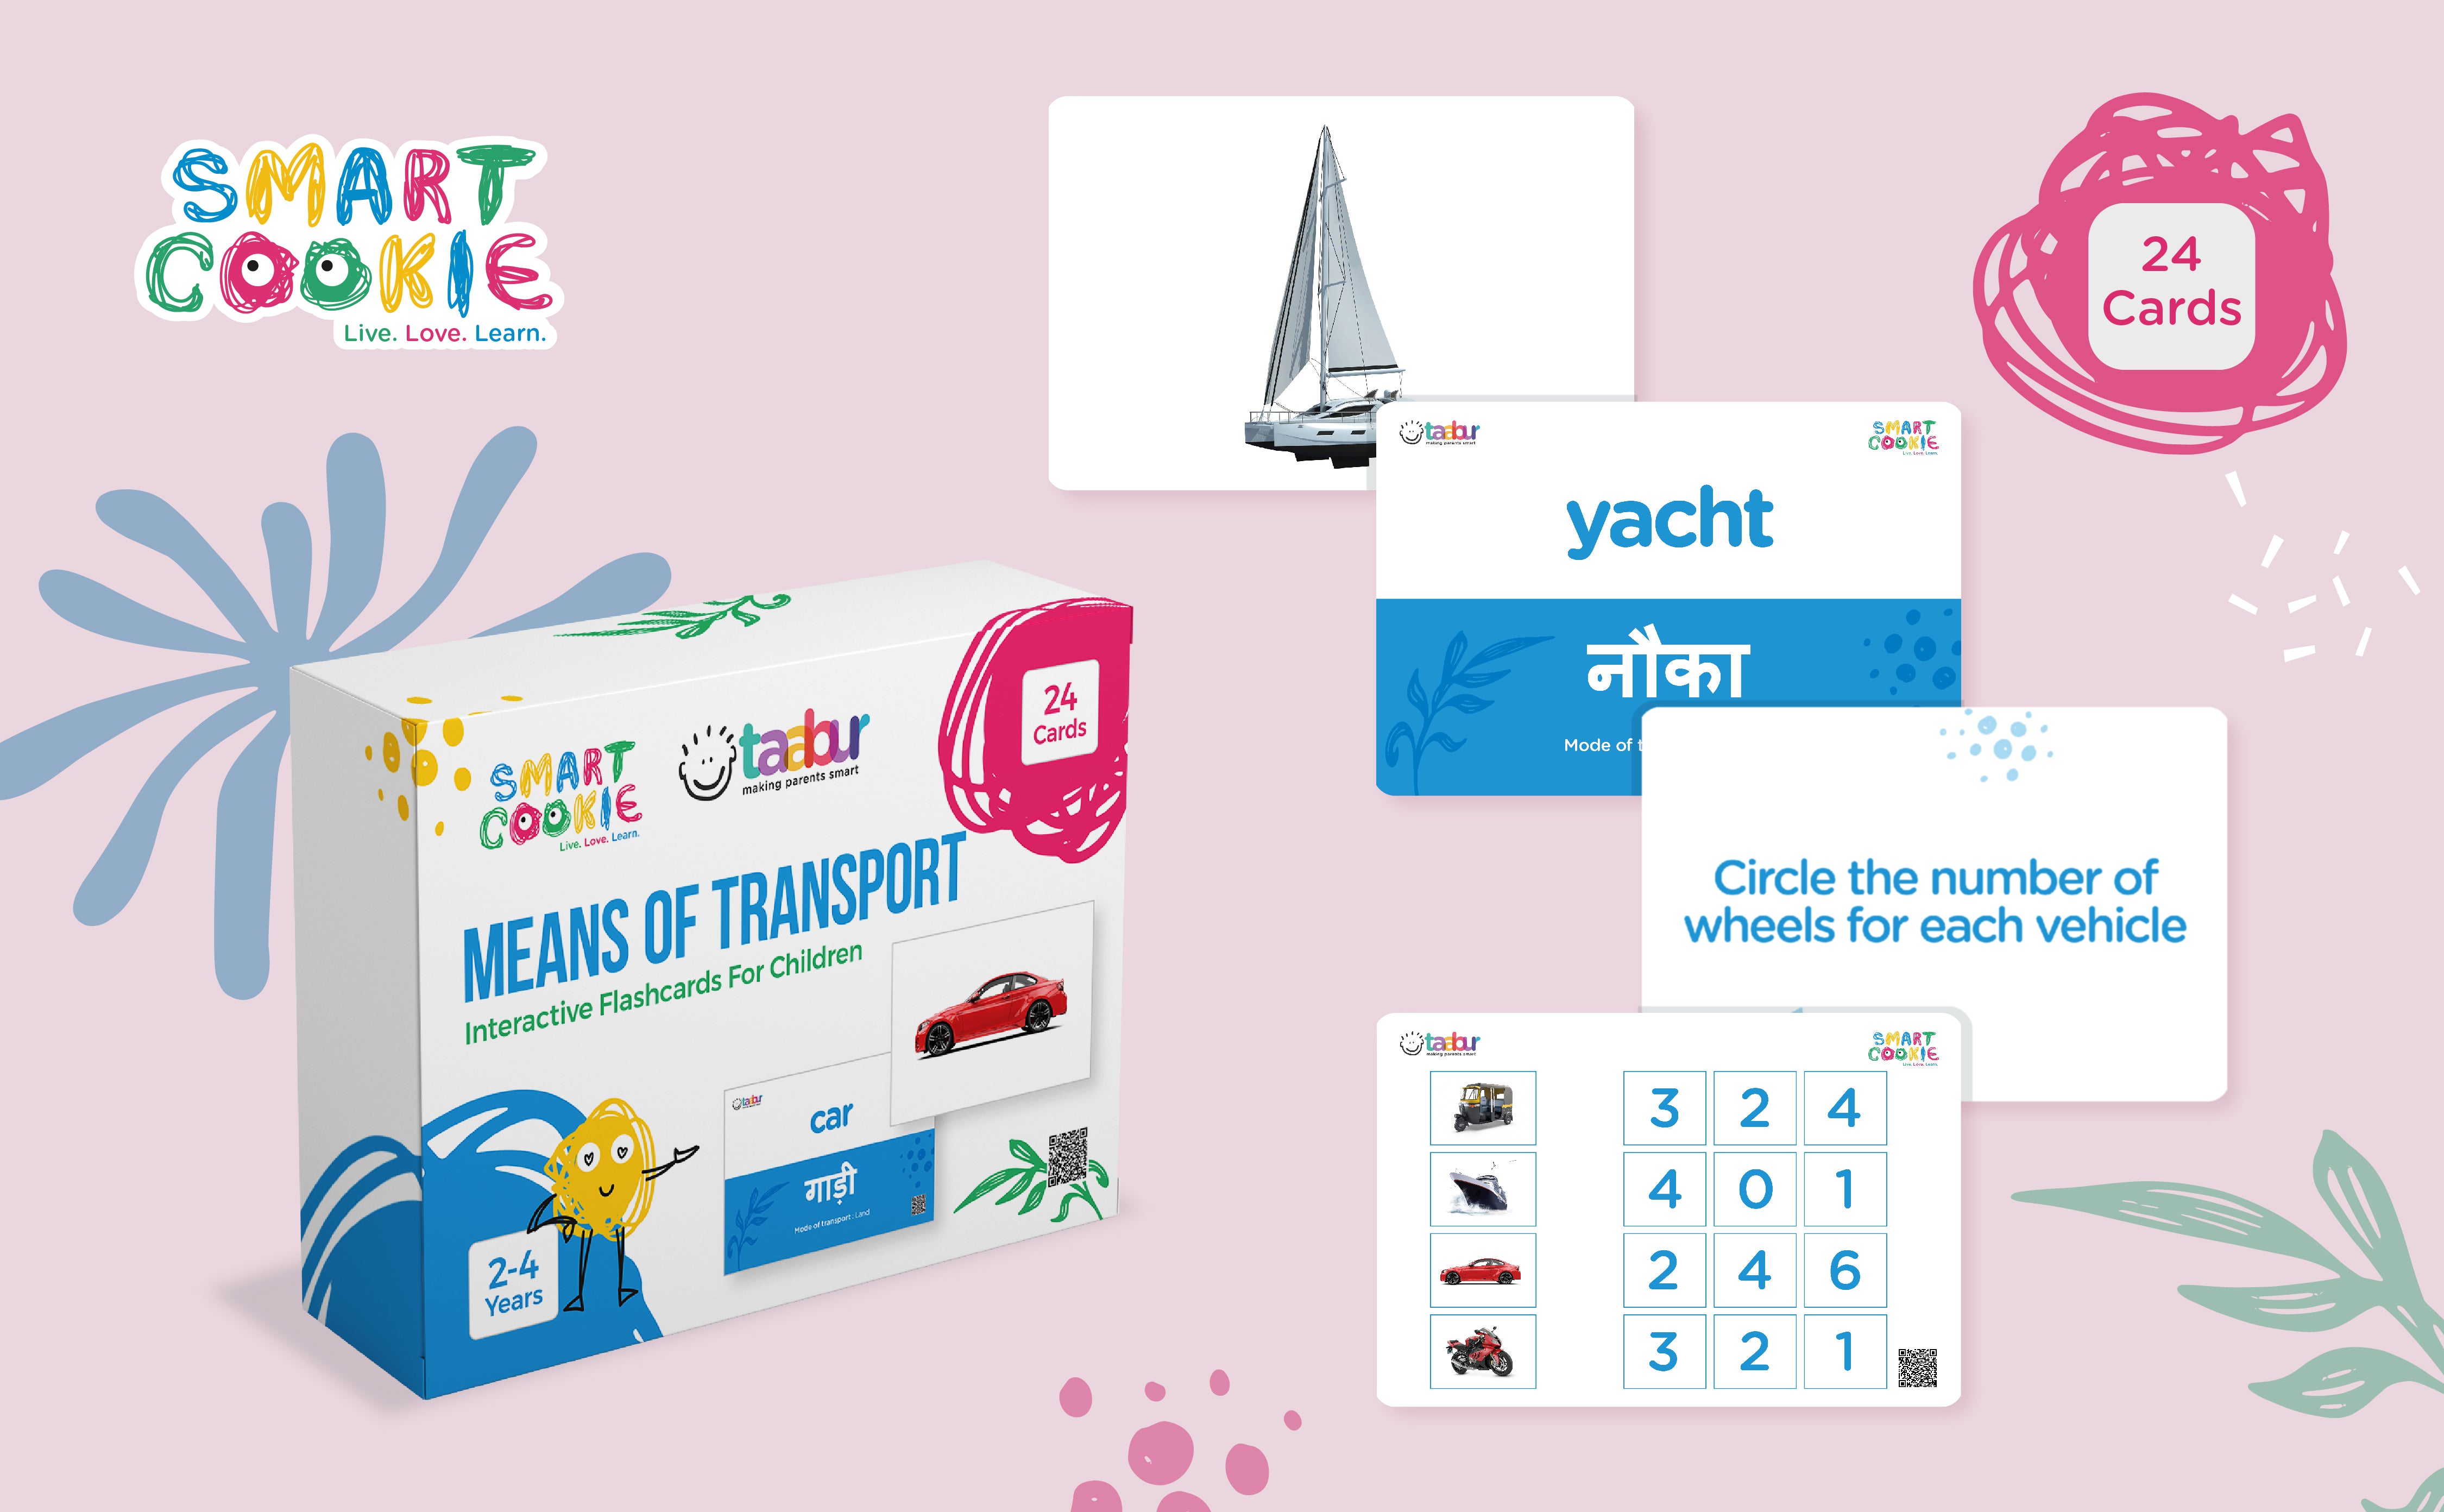 Means of Transport - Interactive Flash Cards for Children (24 Cards) - for Kids Aged 2 to 4 Years Old